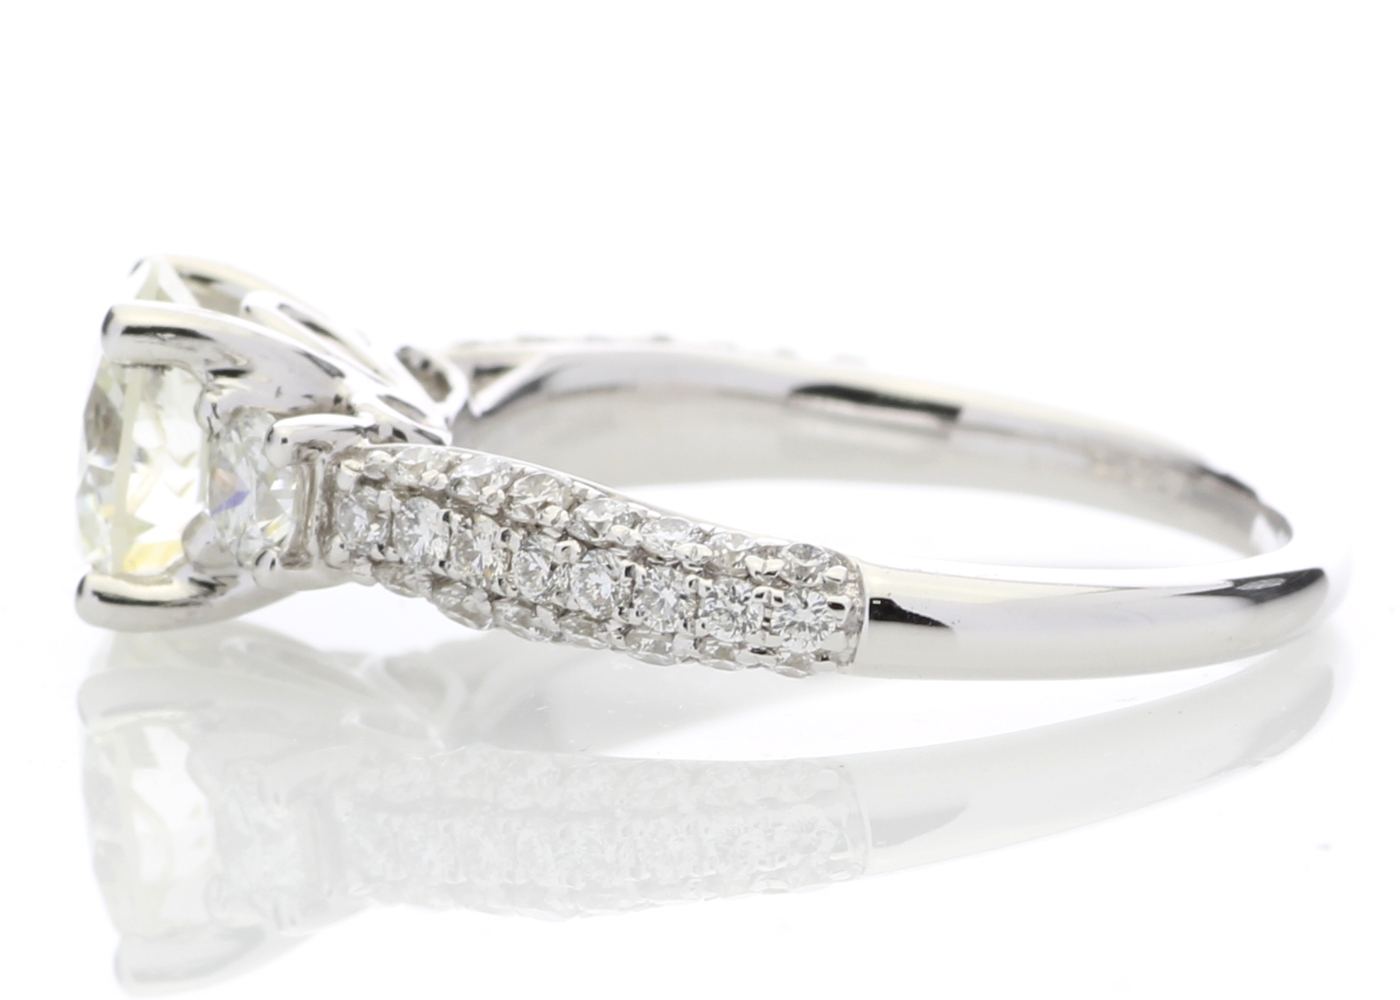 18ct White Gold Single Stone Claw Set With Stone Set Shoulders Diamond Ring (1.40) 2.07 Carats - Image 3 of 5